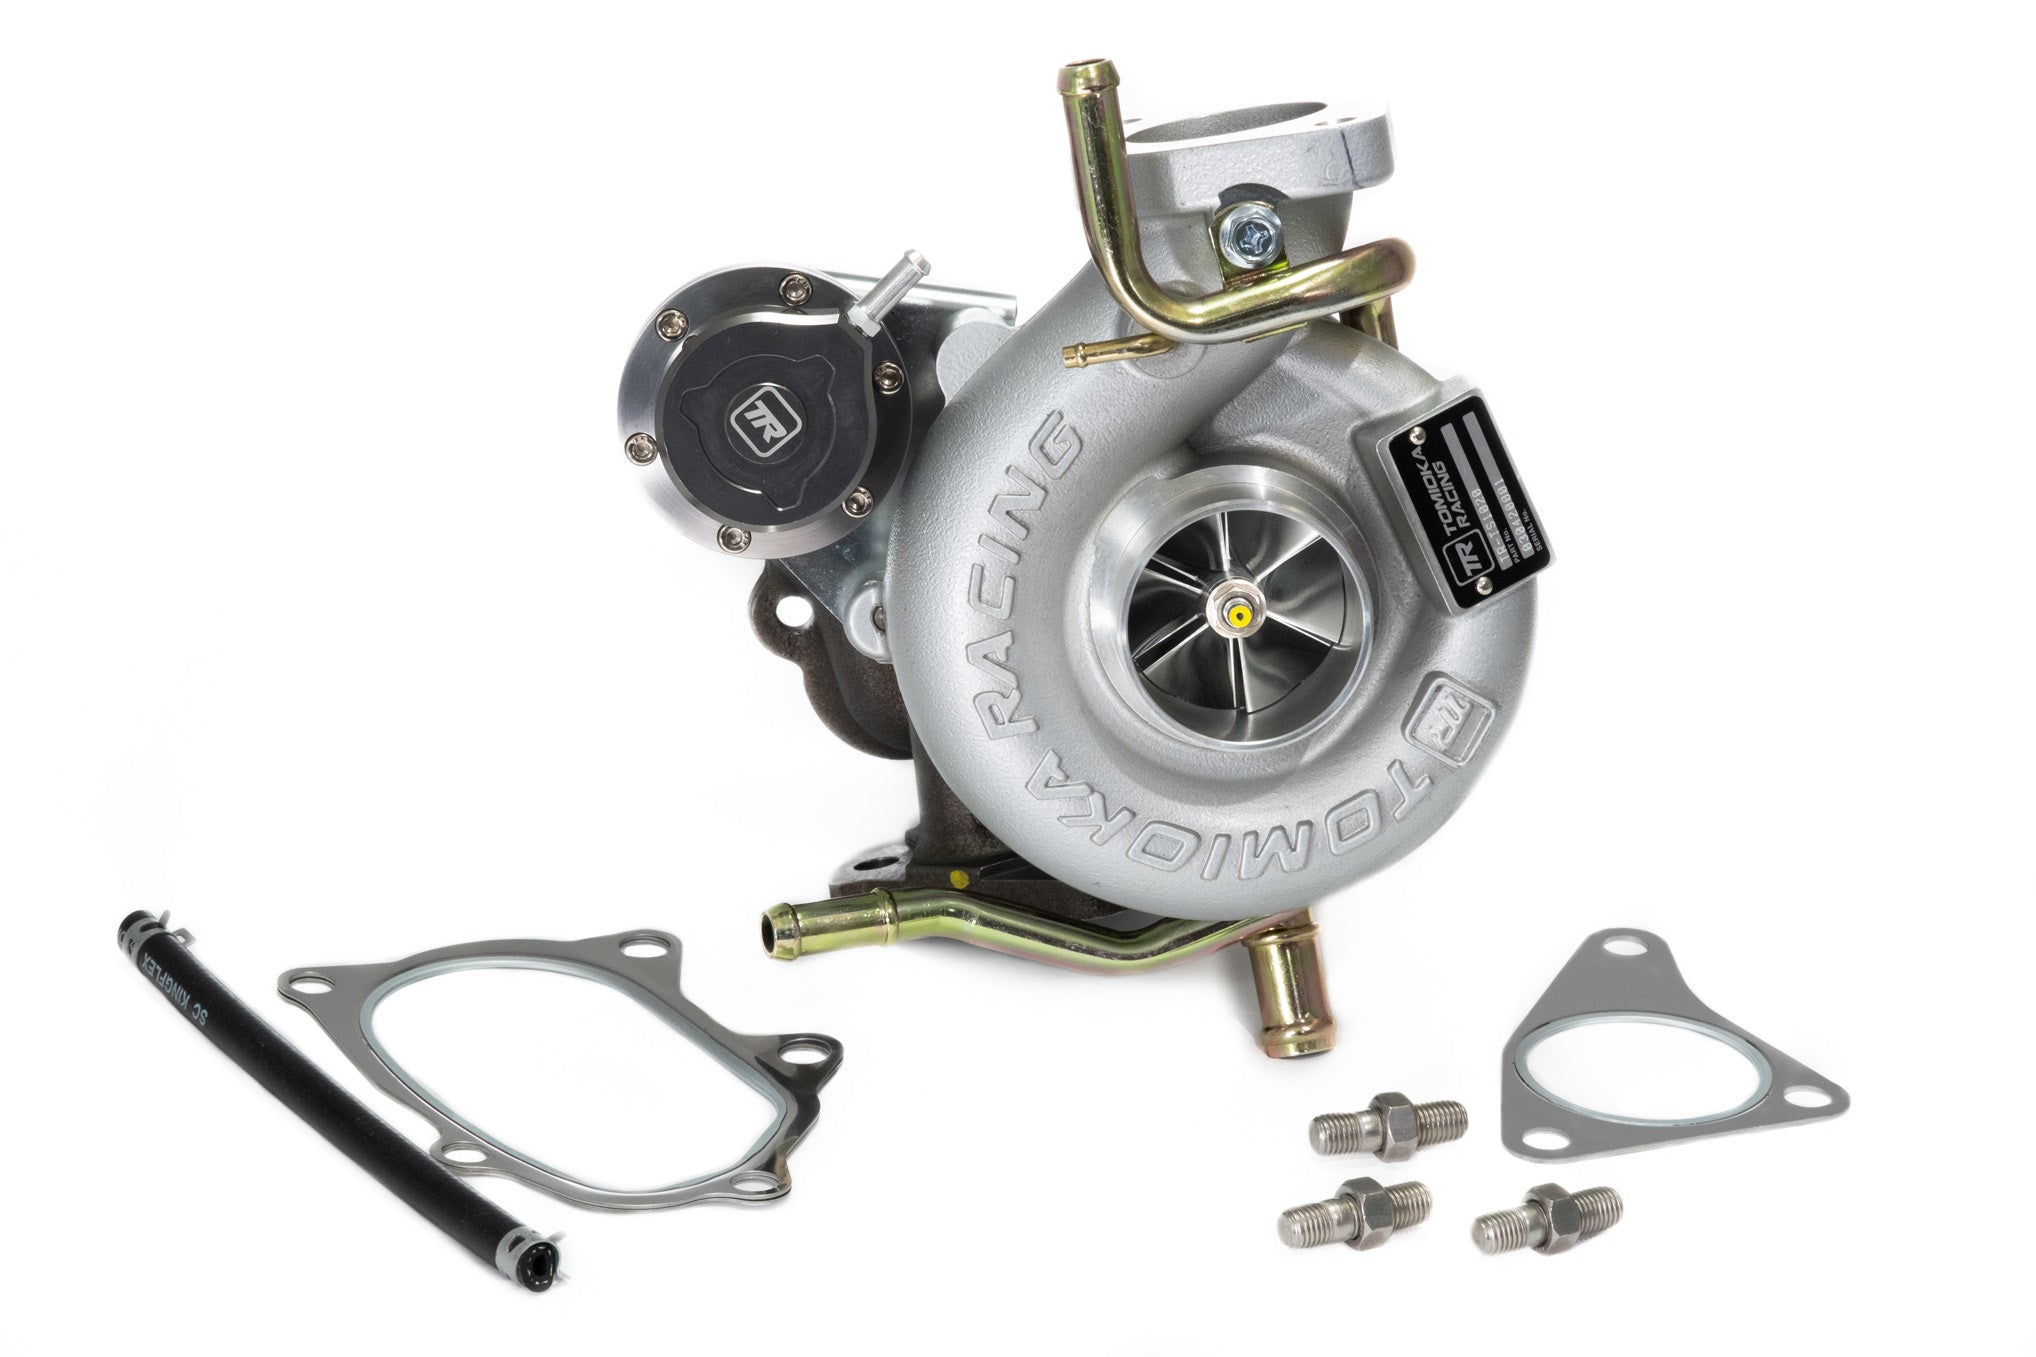 TR Billet TD05-18G Turbo for Subaru Impreza 2008-2014, Legacy GT 2005-2008  and Forester SH5/9 2008 and Motul 300V Power & Competition